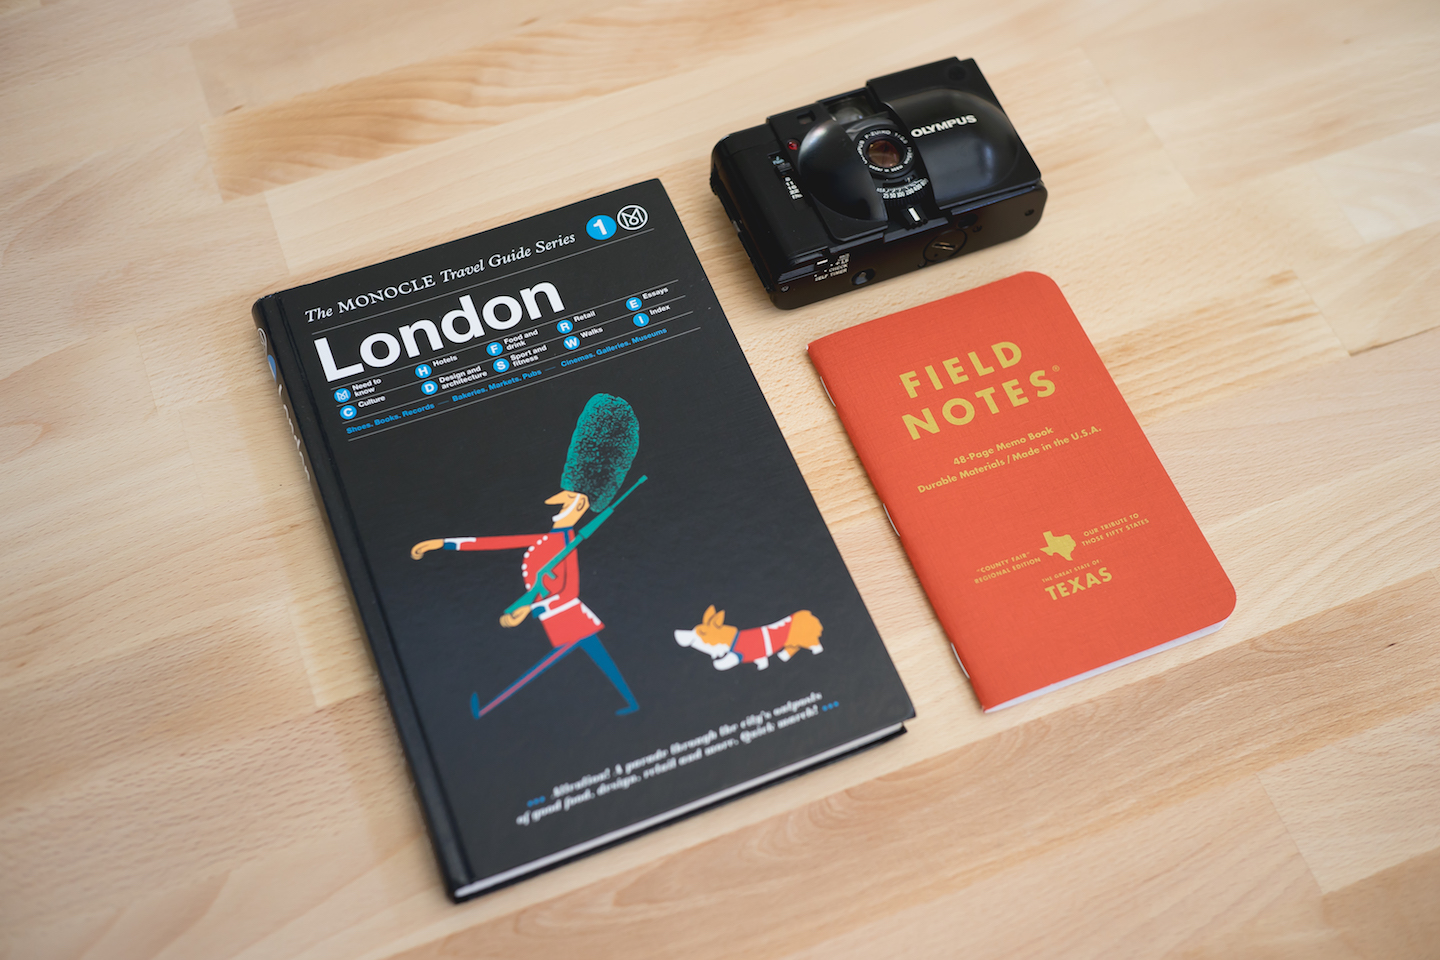 The Monocle Travel Guide Series: Fall 2015 Travel